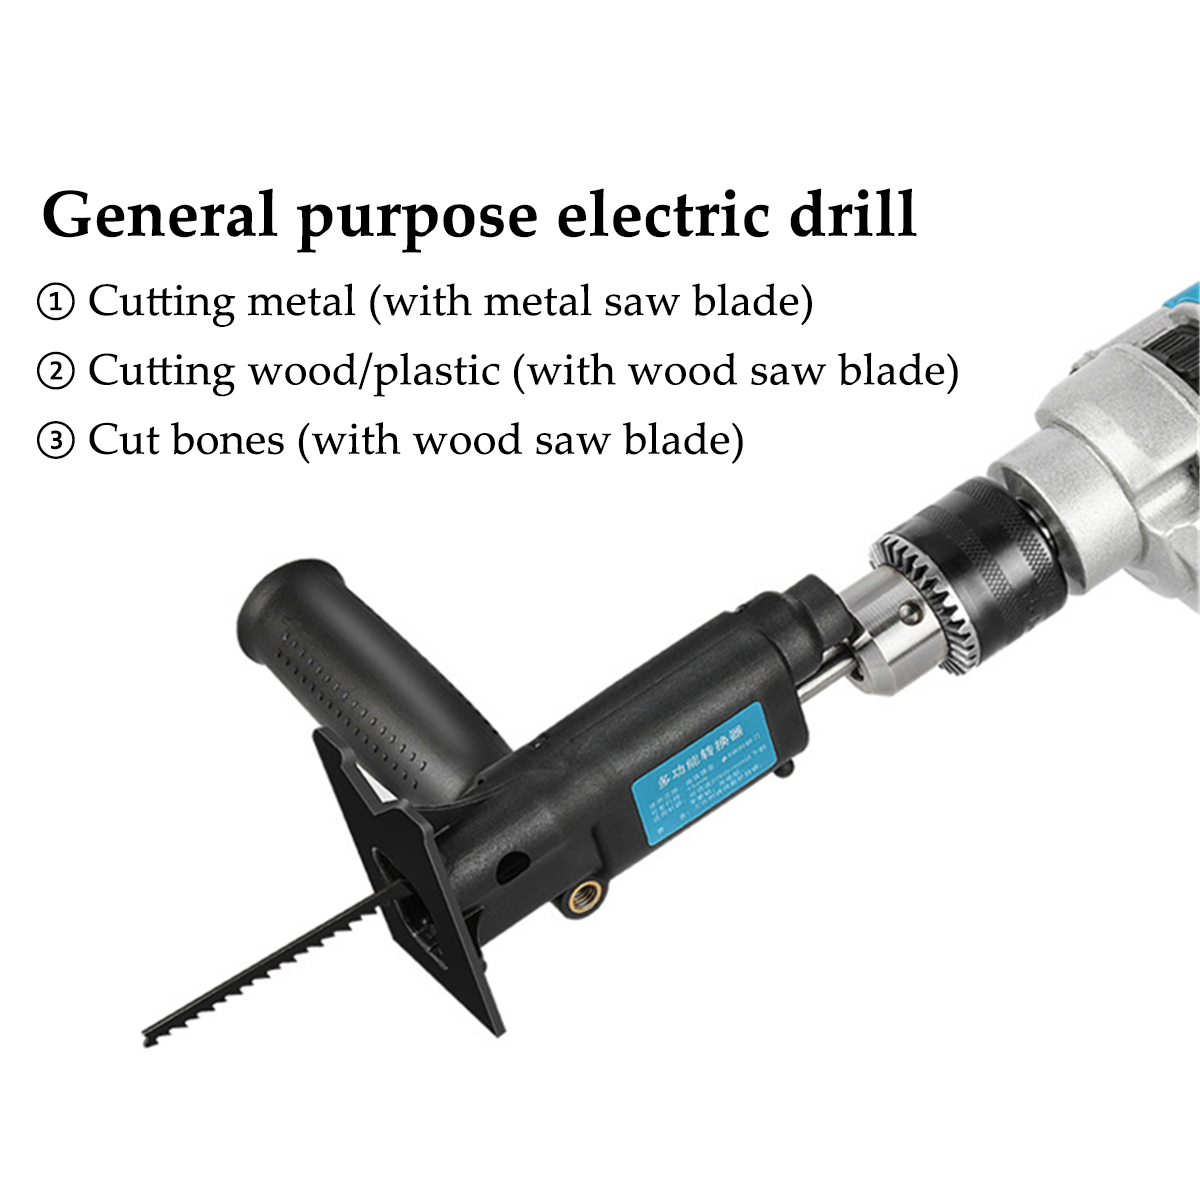 Reciprocating-Saw-Attachment-Adapter-Change-Electric-Drill-Into-Reciprocating-Saw-Jig-Saw-Woodworkin-1793120-9